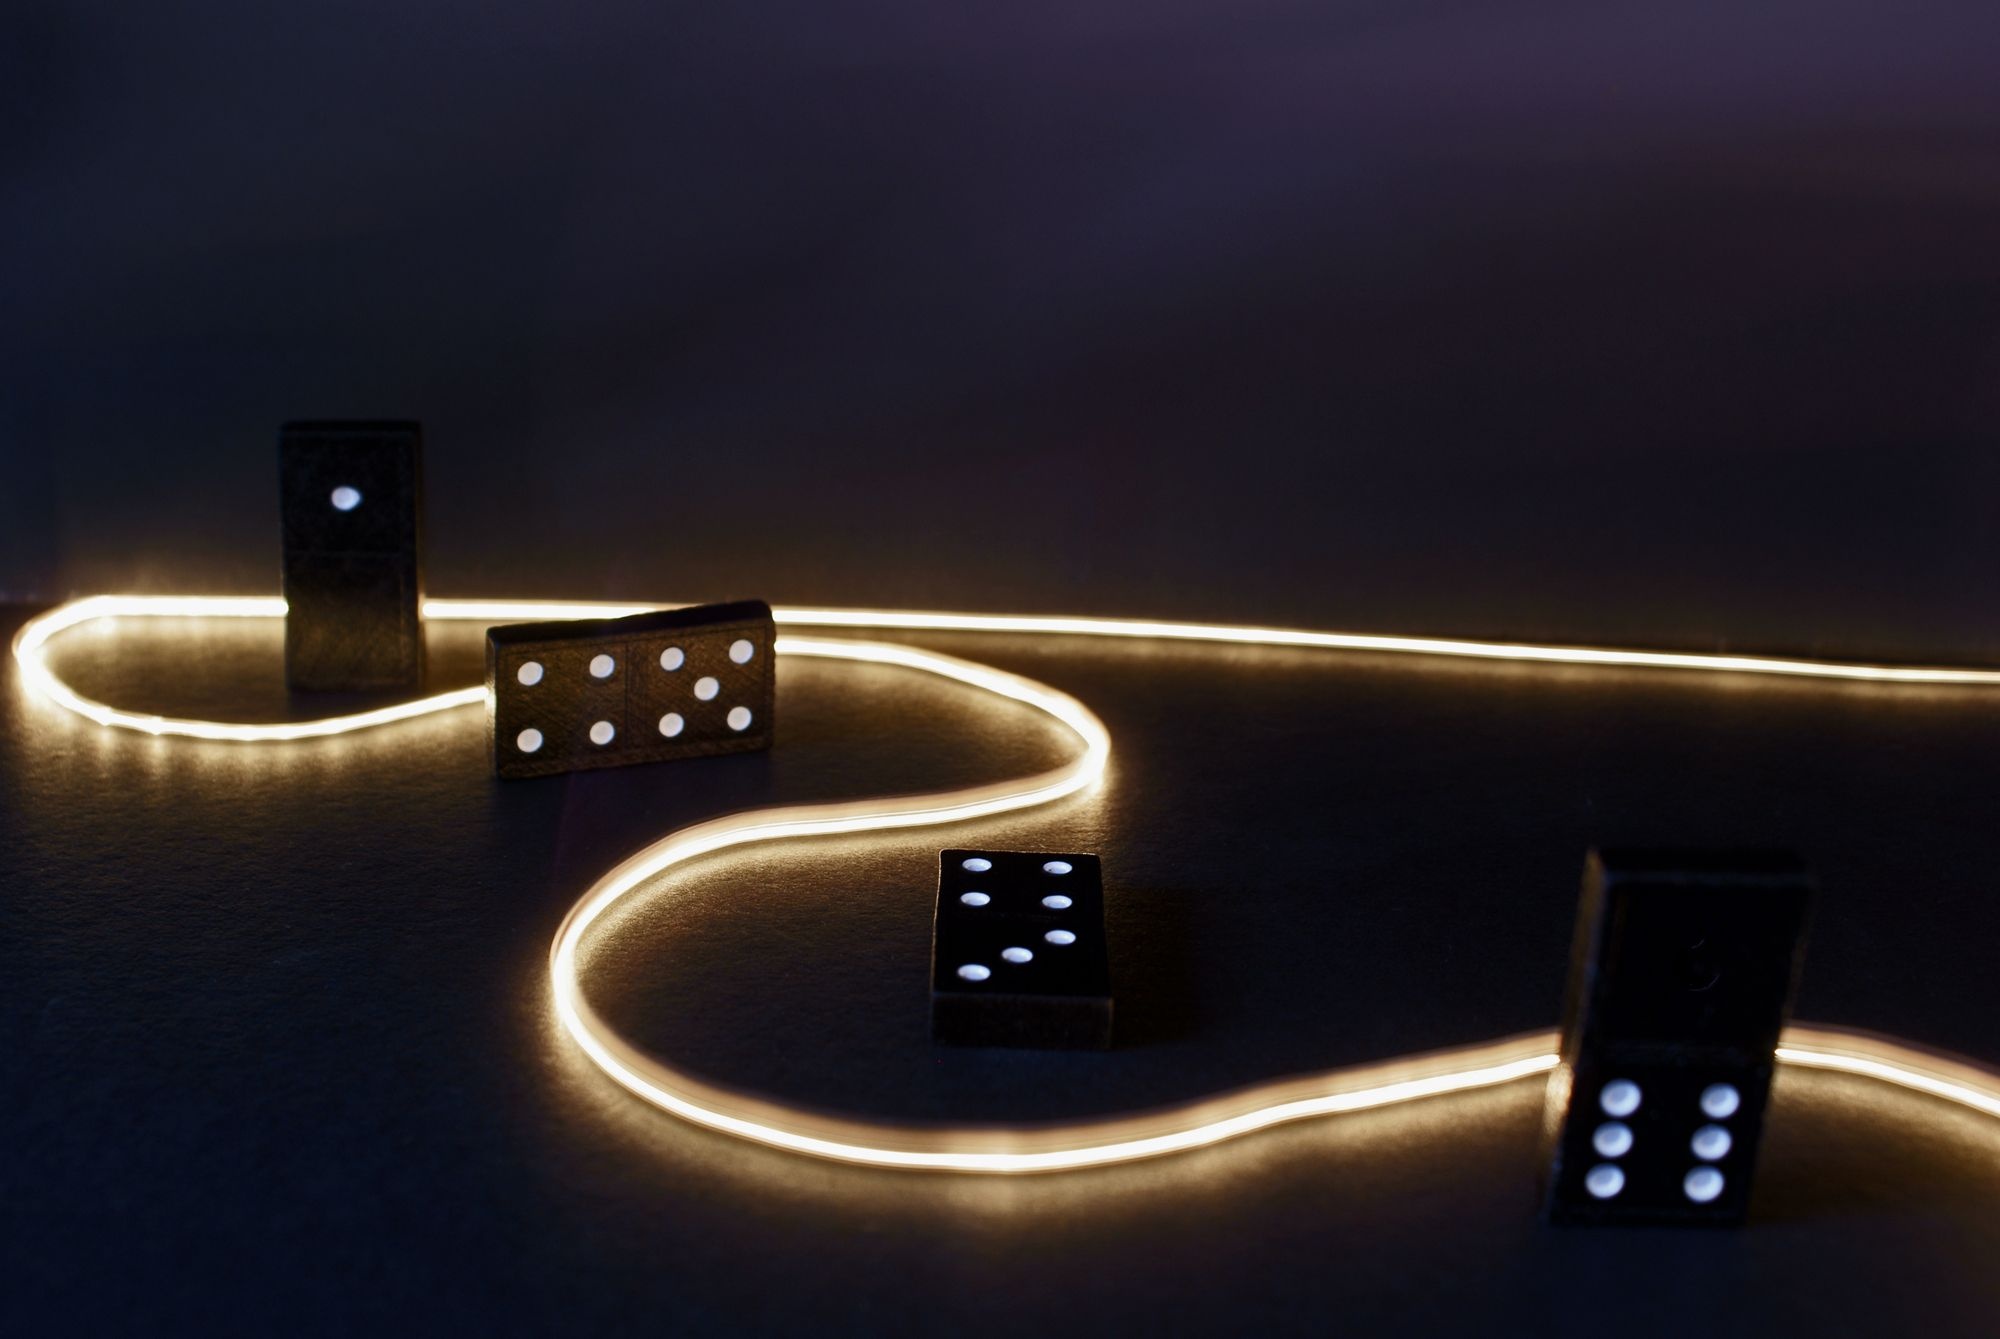 Dominoes: Small pieces of tiles surrounded by a LED ribbon, Minimalistic set of bones. 2000x1340 HD Wallpaper.